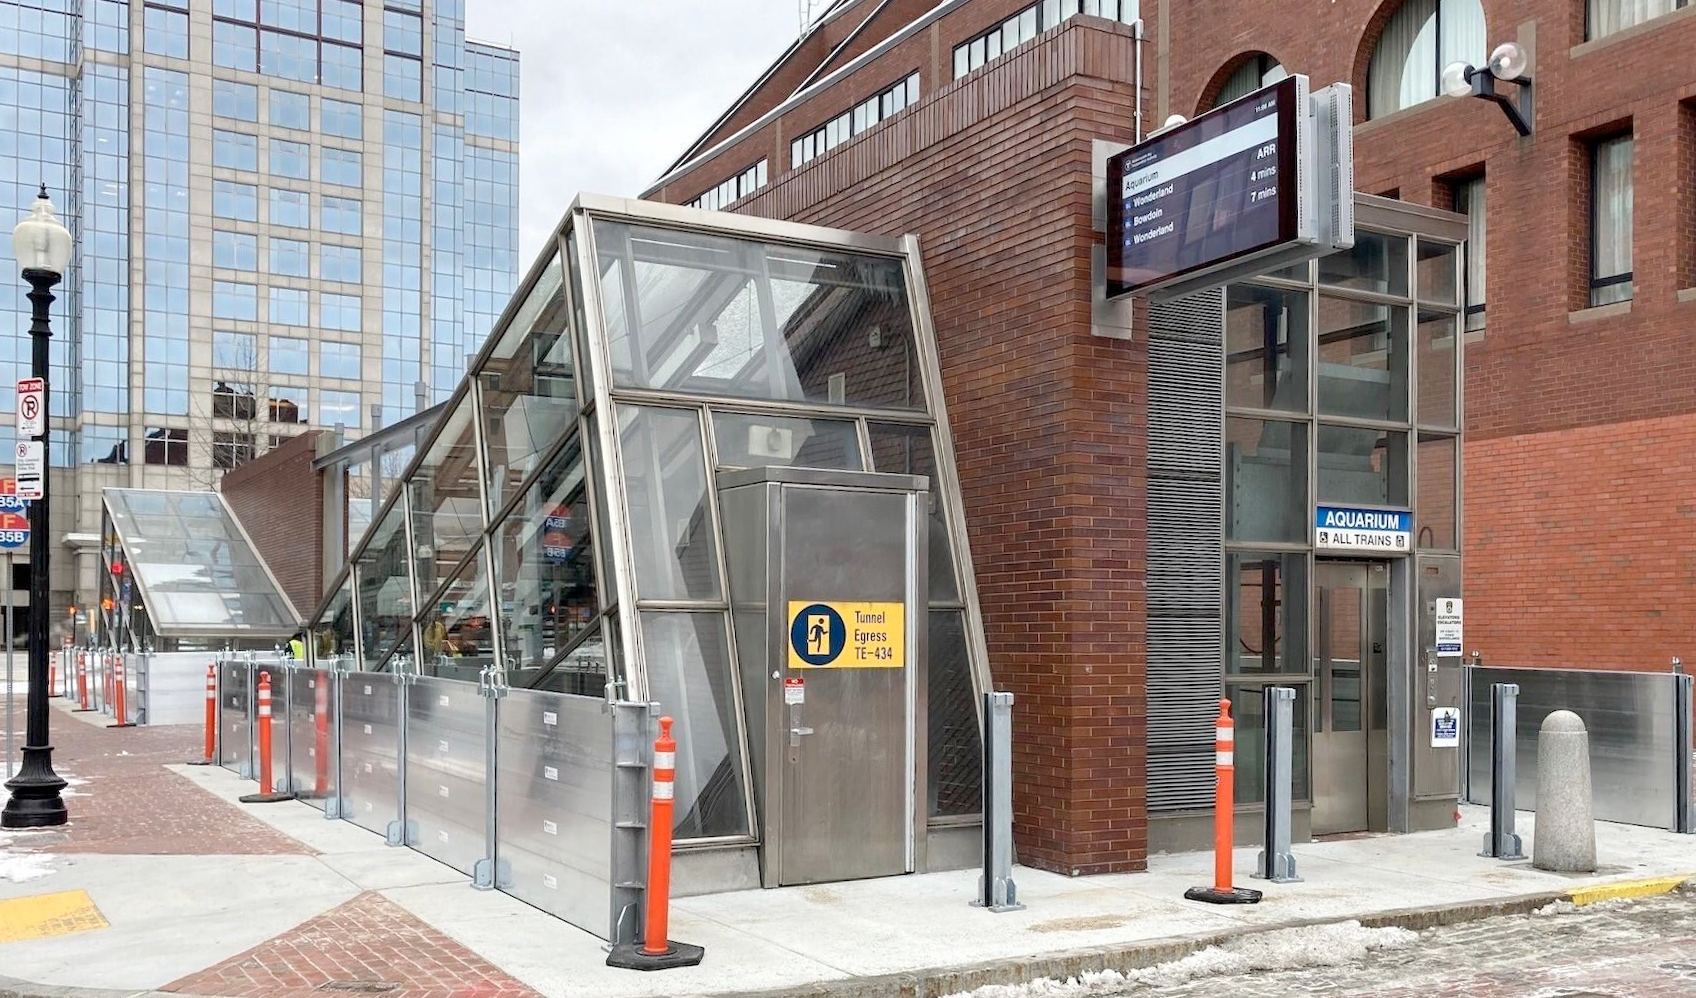 New flood barriers being installed outside the Aquarium MBTA station on the Boston waterfront